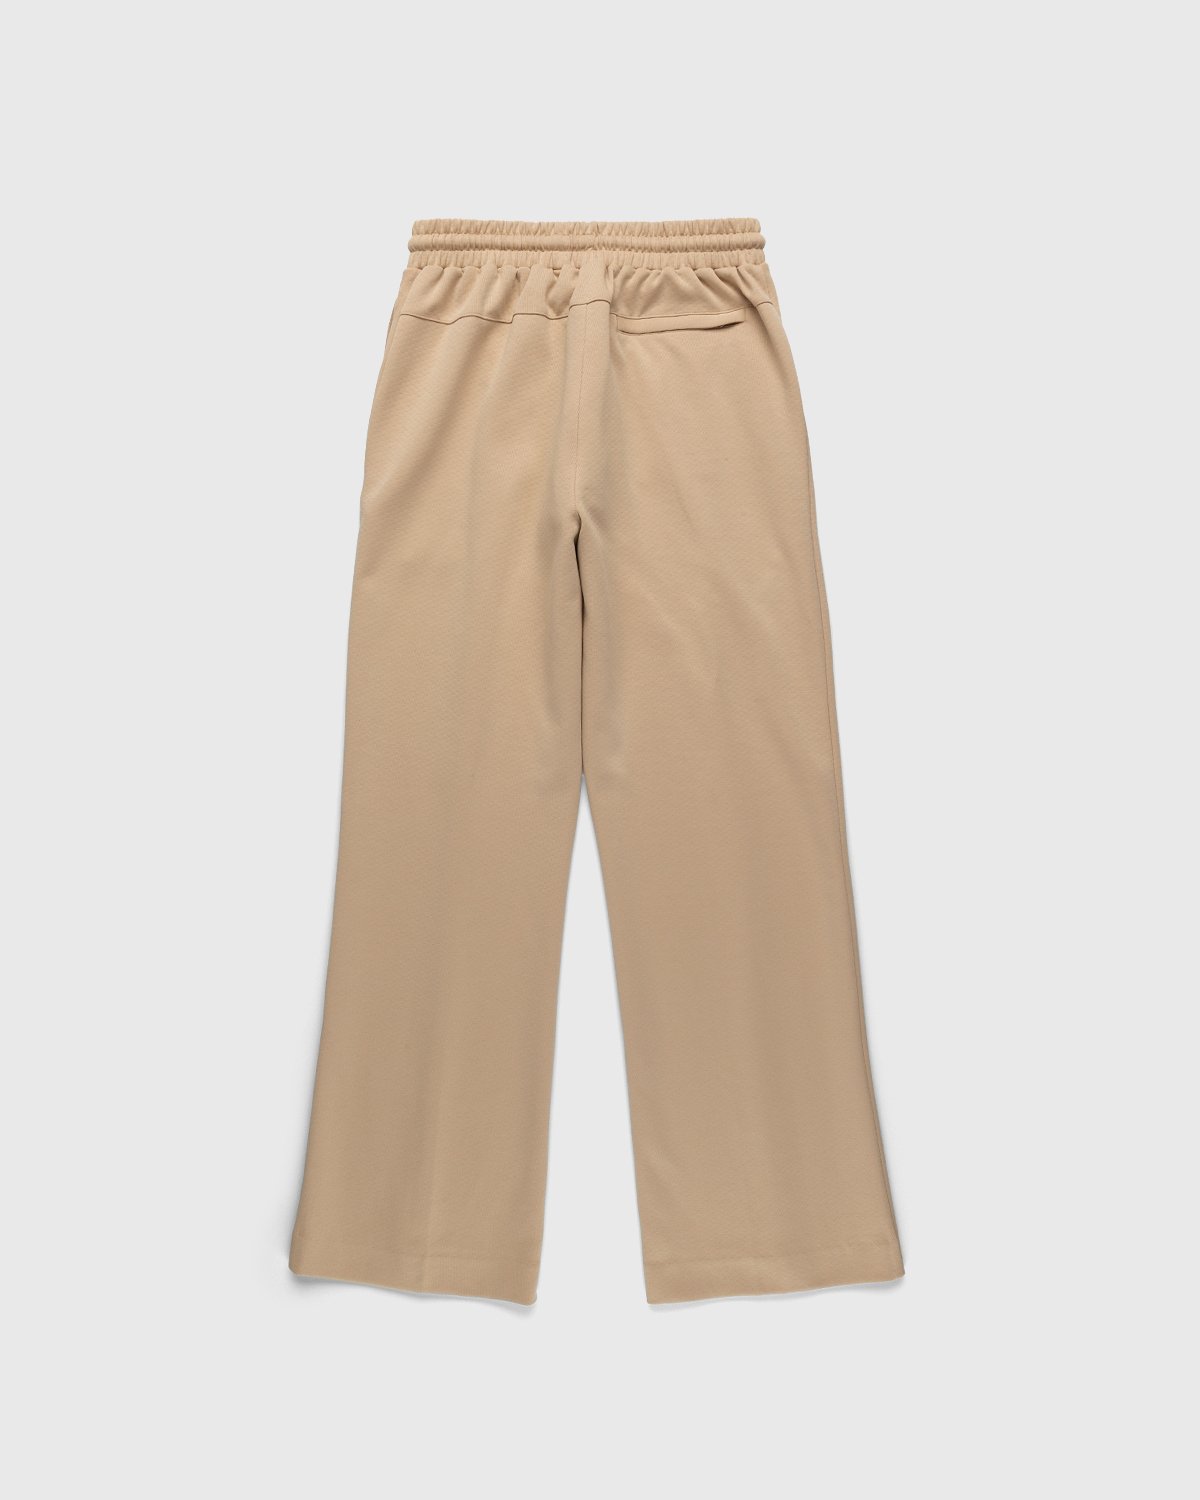 Puma x AMI - Wide Logo Pants Ginger Root - Clothing - Beige - Image 2